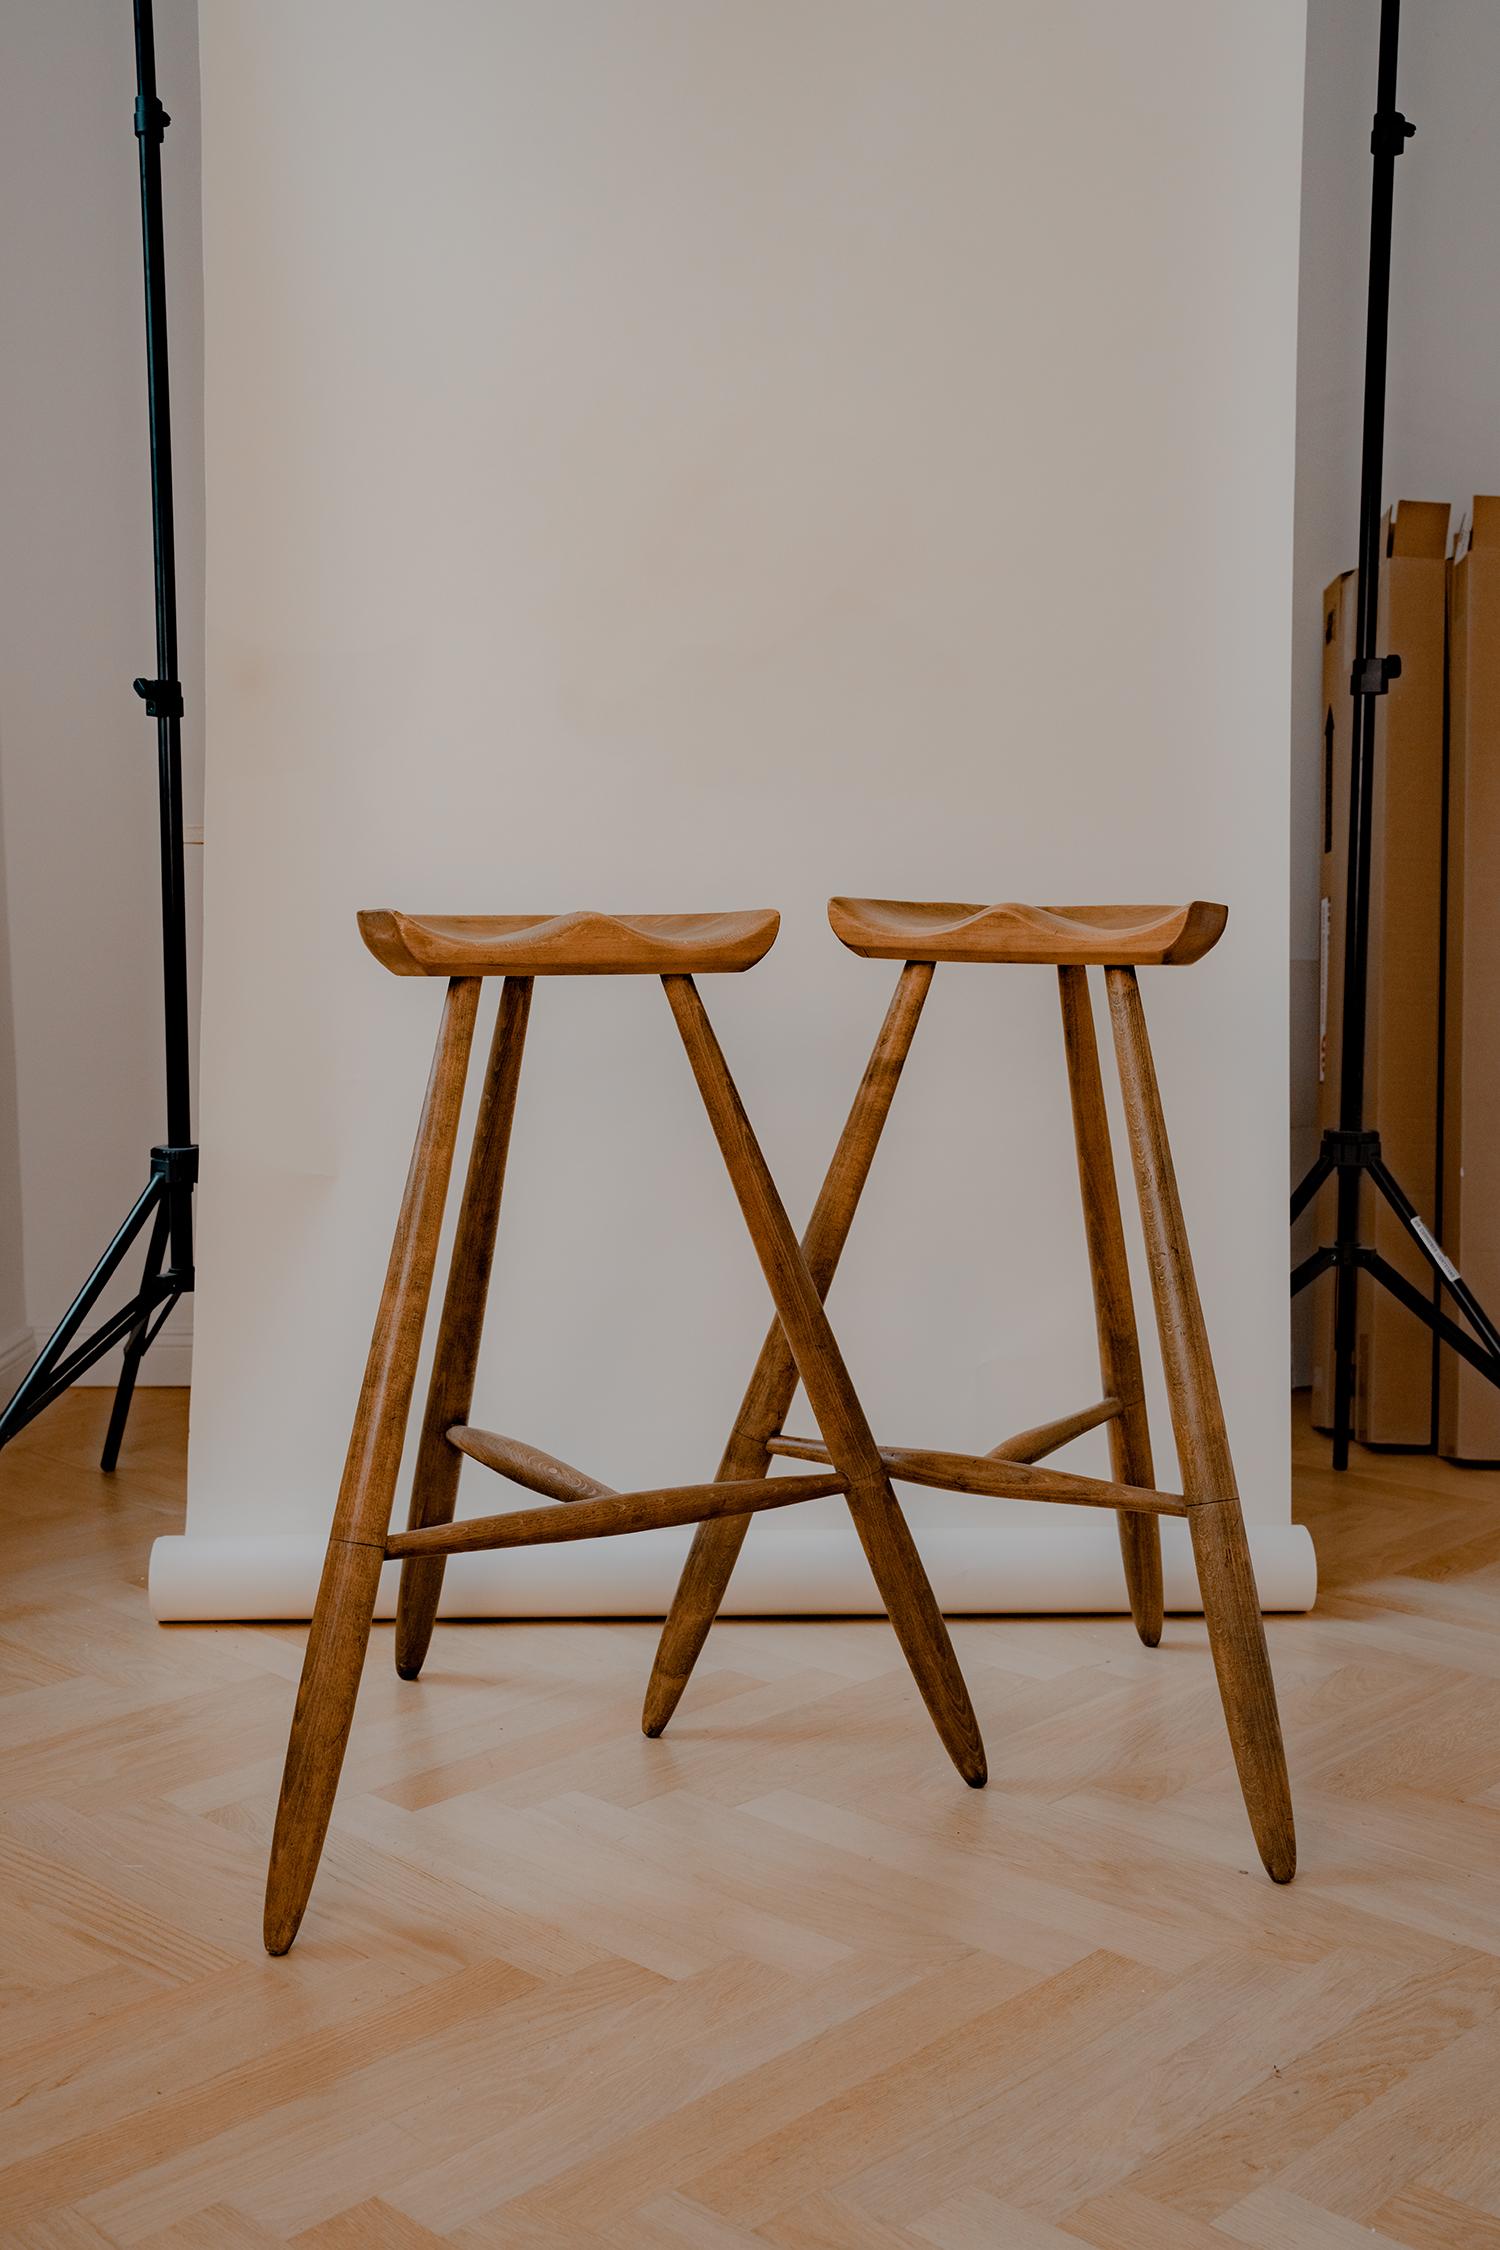 Explore our online store and discover an exceptional pairing of two very tall functional stools in the style of milking stools with three legs, designed by Arne Hovmand-Olsen from Denmark in the 1940s. These impressive stools crafted from beech wood